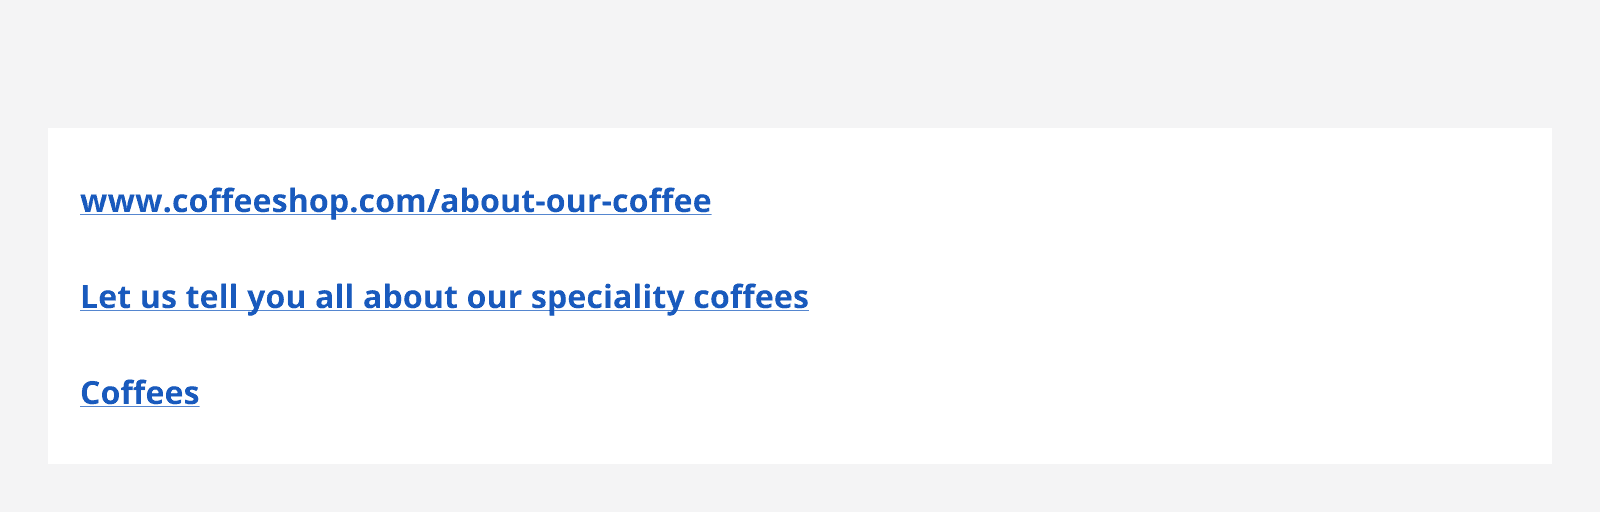 An example of three links. One reads ‘www.coffeeshop.com/about-our-coffees', the second reads ‘Let us tell you all about our speciality coffees’, and the third reads ‘Coffees’.